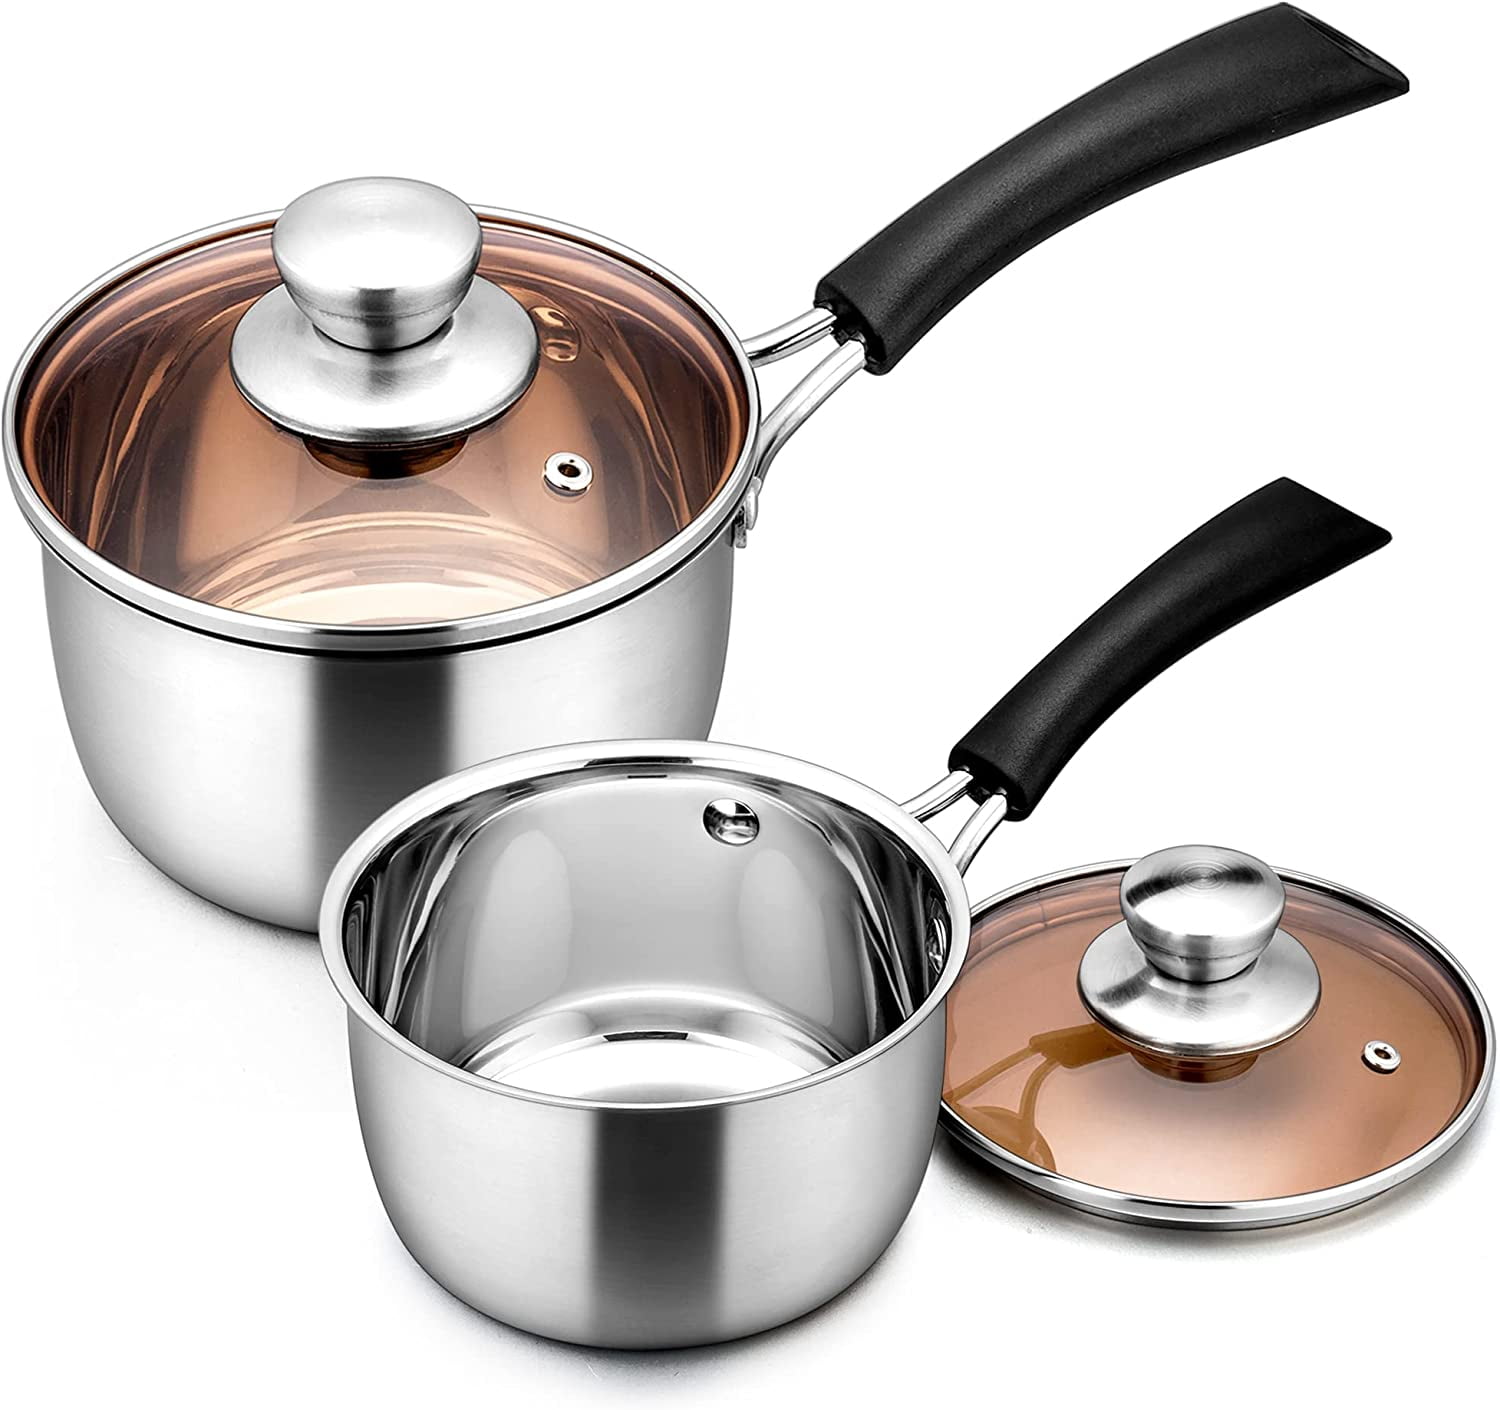 Cook N Home Saucepan Sauce Pot with Lid 2 Quart Stainless Steel , Stay